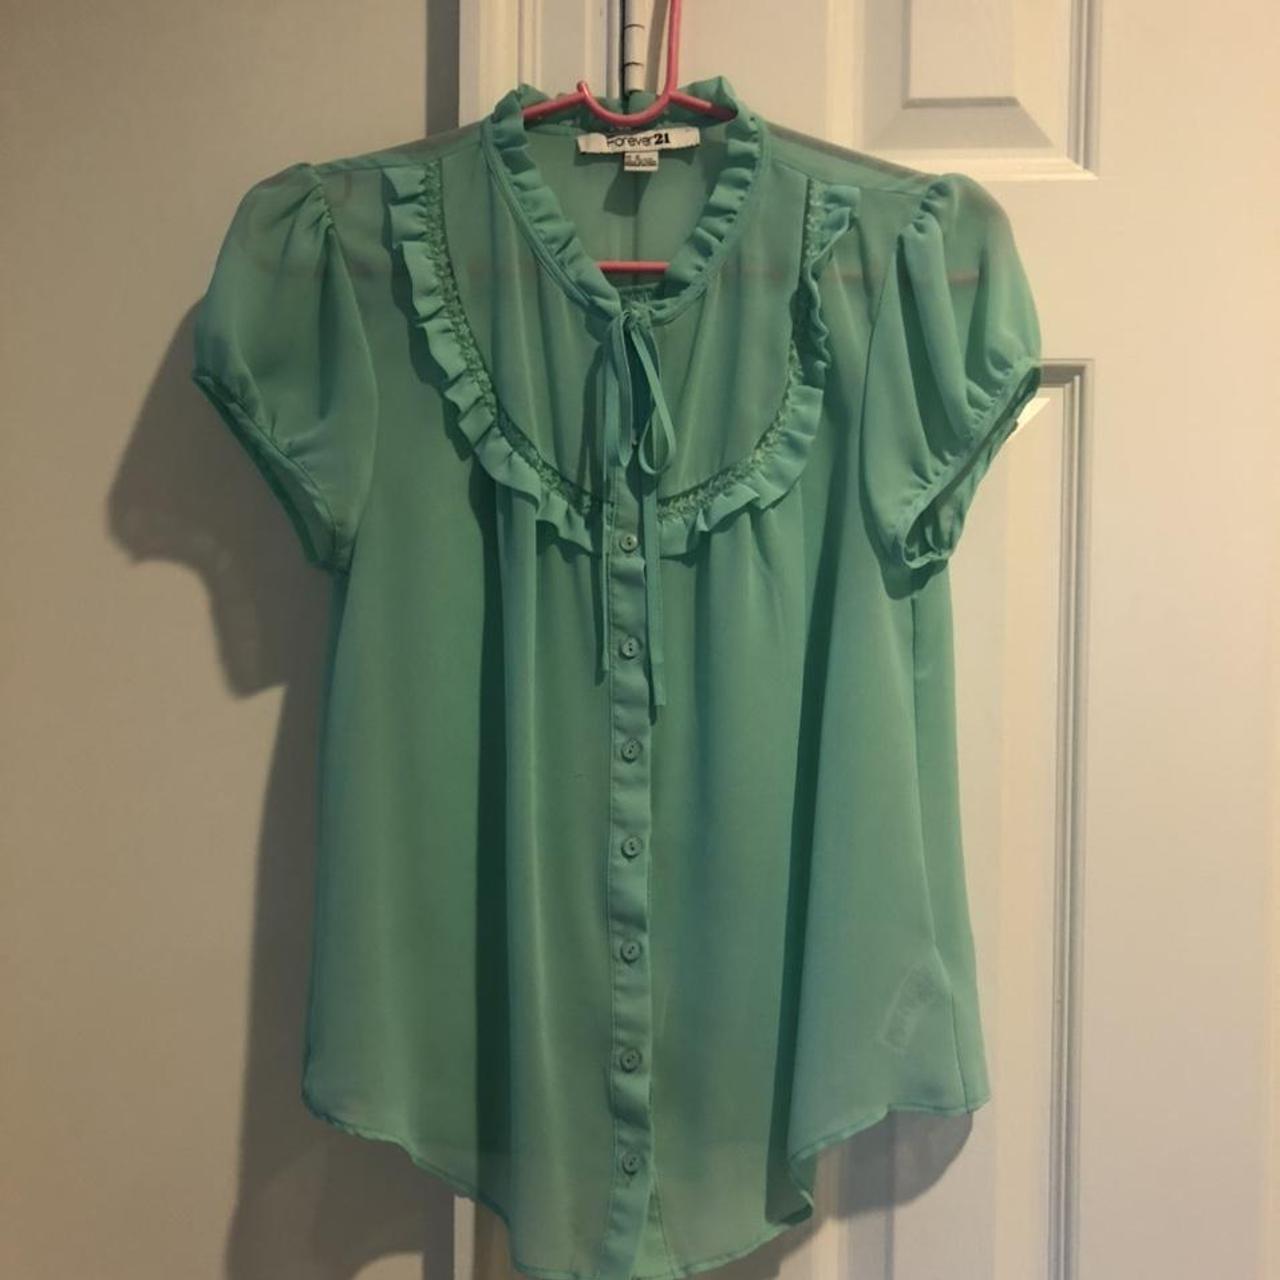 Forever 21 Women's Blue and Green Blouse | Depop